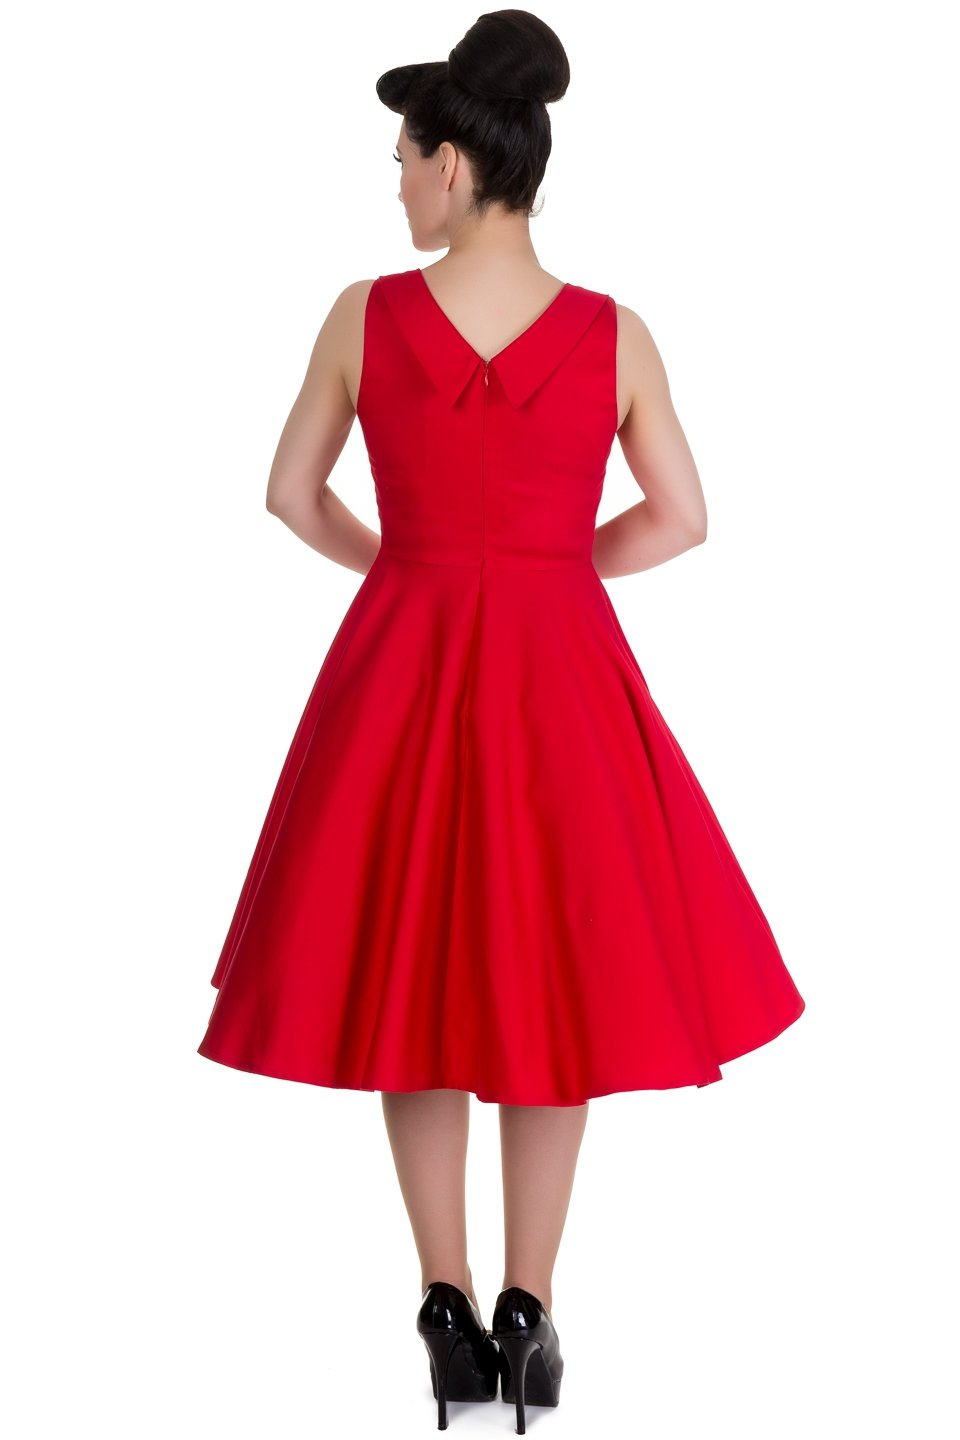 Vintage Style Jive Dress in All Red